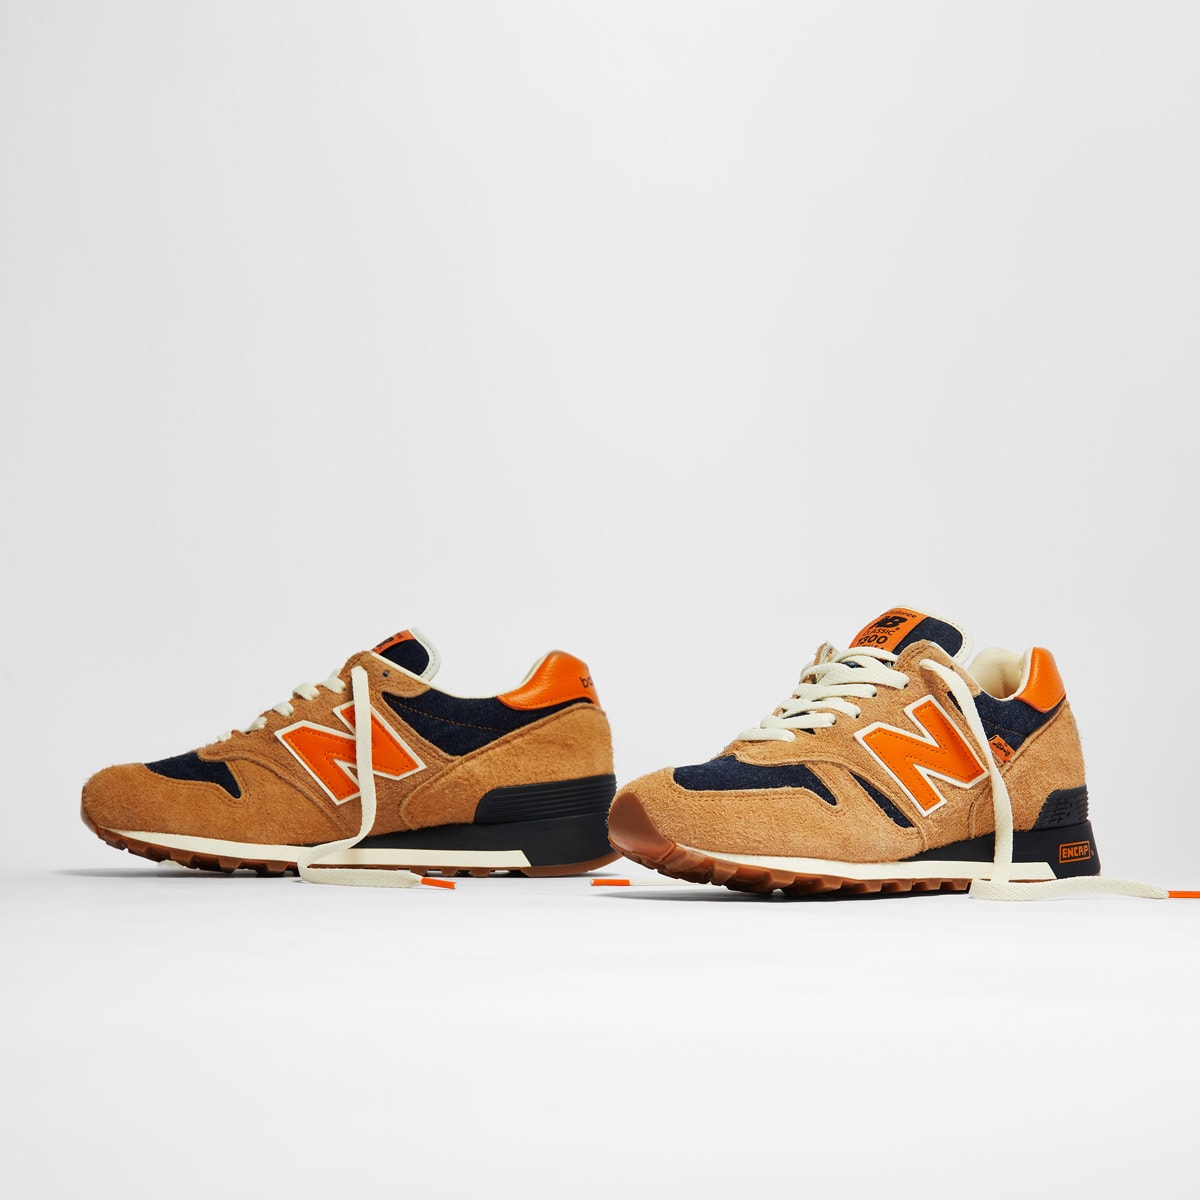 New Balance x Levi's M1300LV - Made in USA (Tan & Indigo) | END. Launches